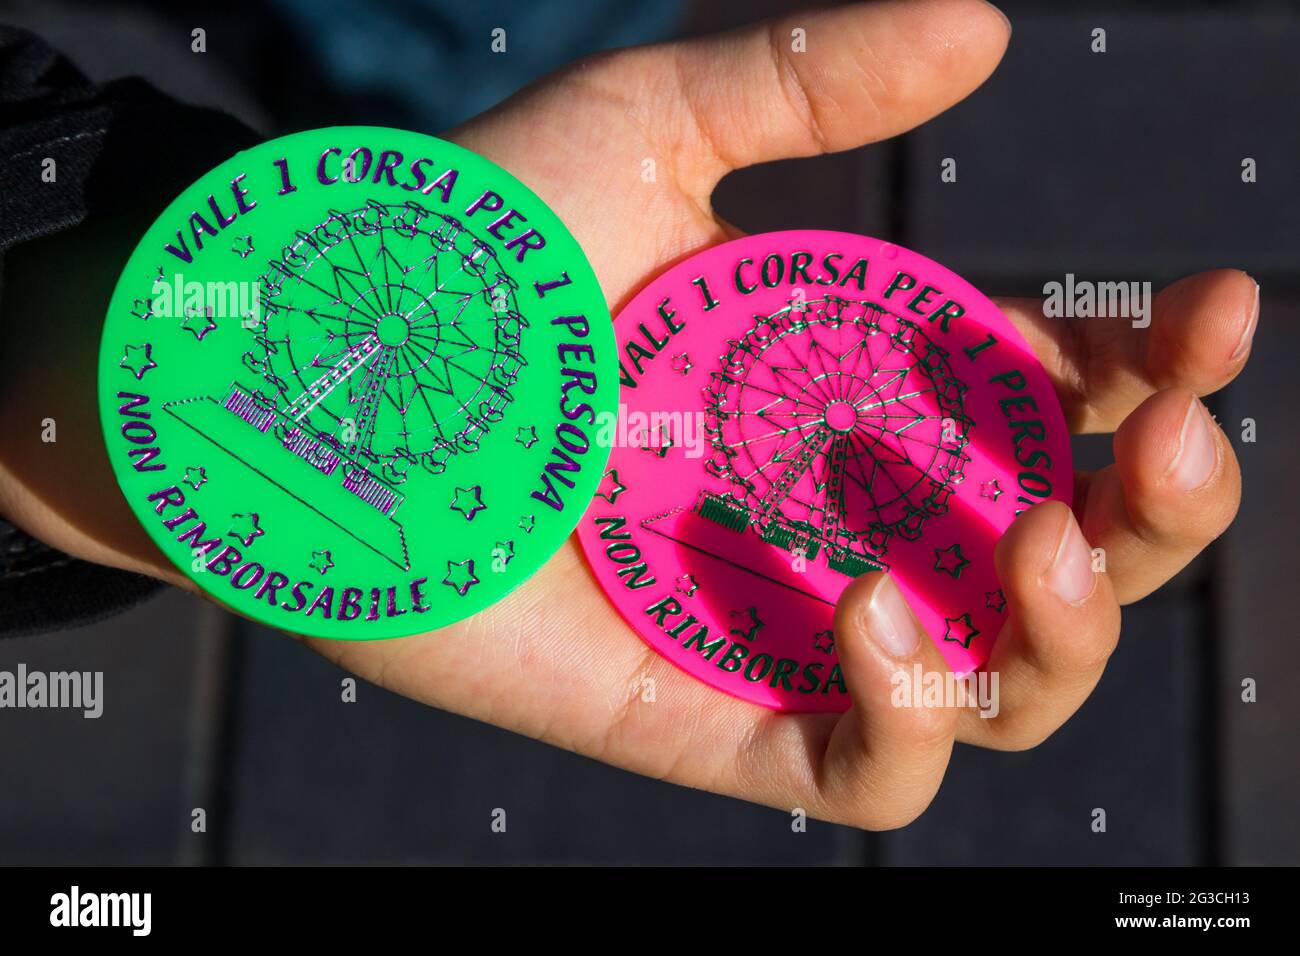 Tickets for the ferris-wheel in Sopron, Hungary. Italian text on plastic disks: Valid for 1 ride per 1 person. Non refundable. Stock Photo